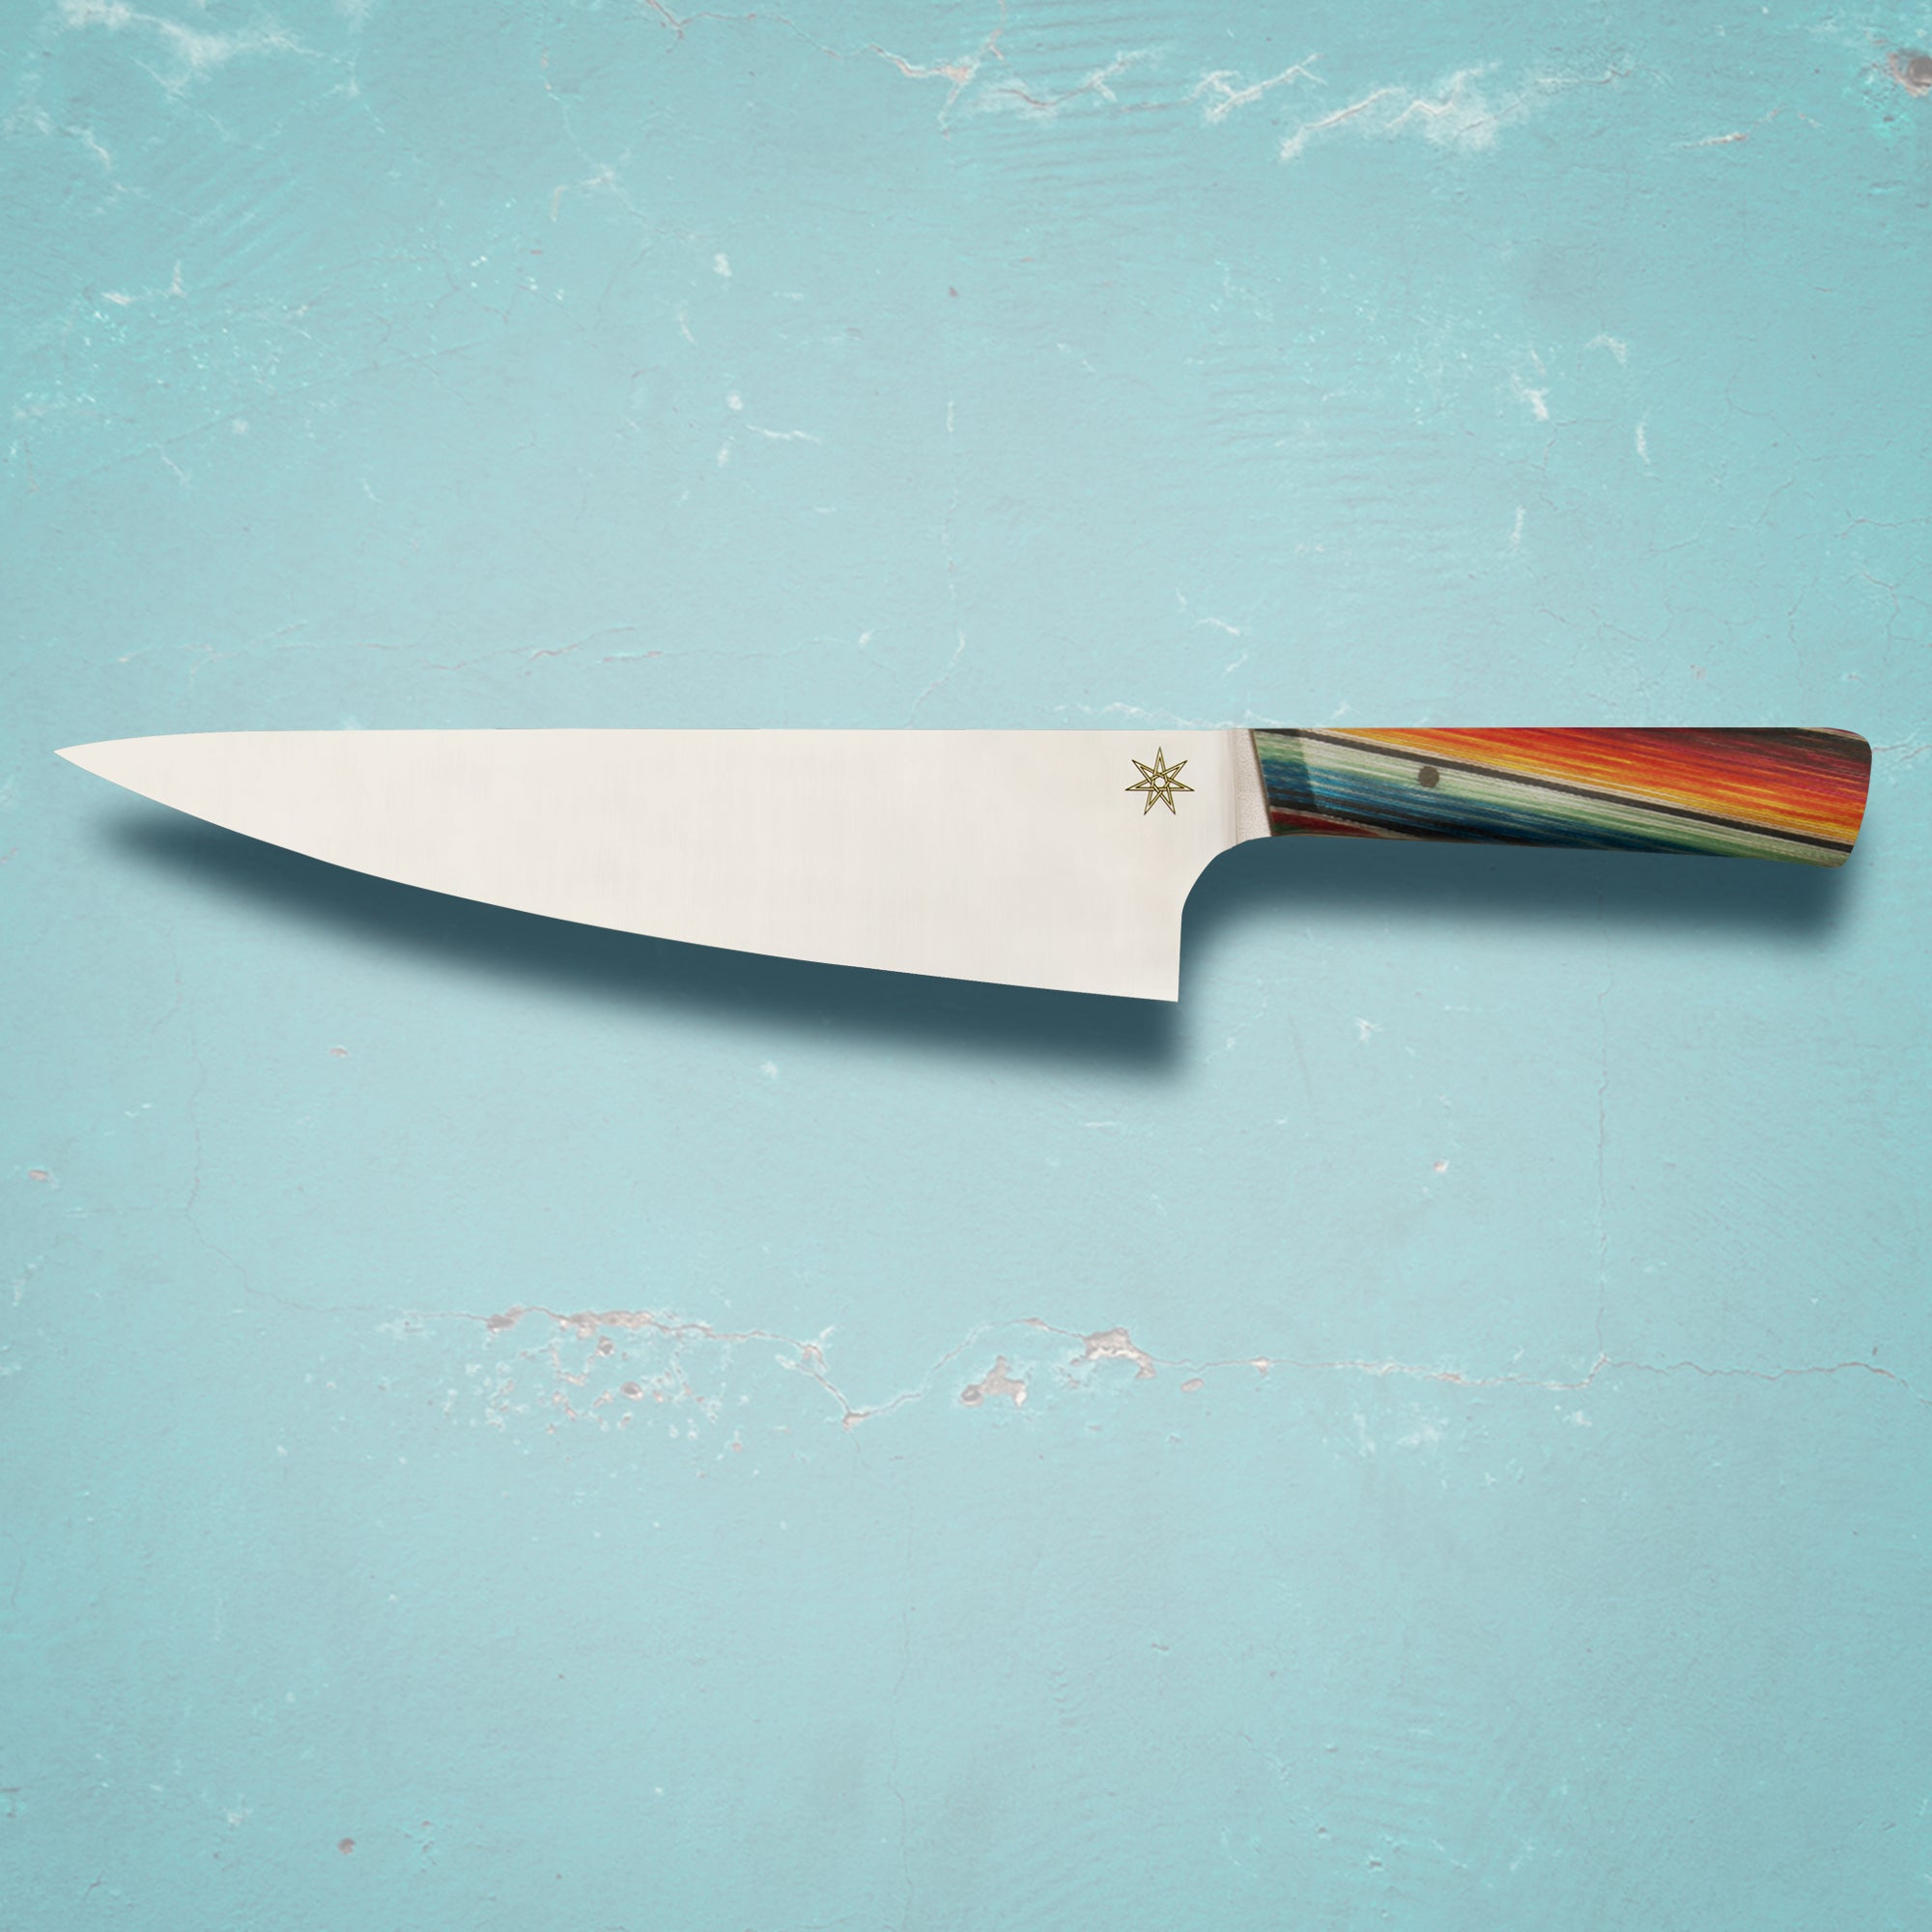 8.5" Chef knife by Town Cutler featuring the Baja “Mexican Blanket Especial” handle and stainless steel blades. The most popular chef knife size in Town Cutler products. Unique, colorful handle is fun yet sophisticated.